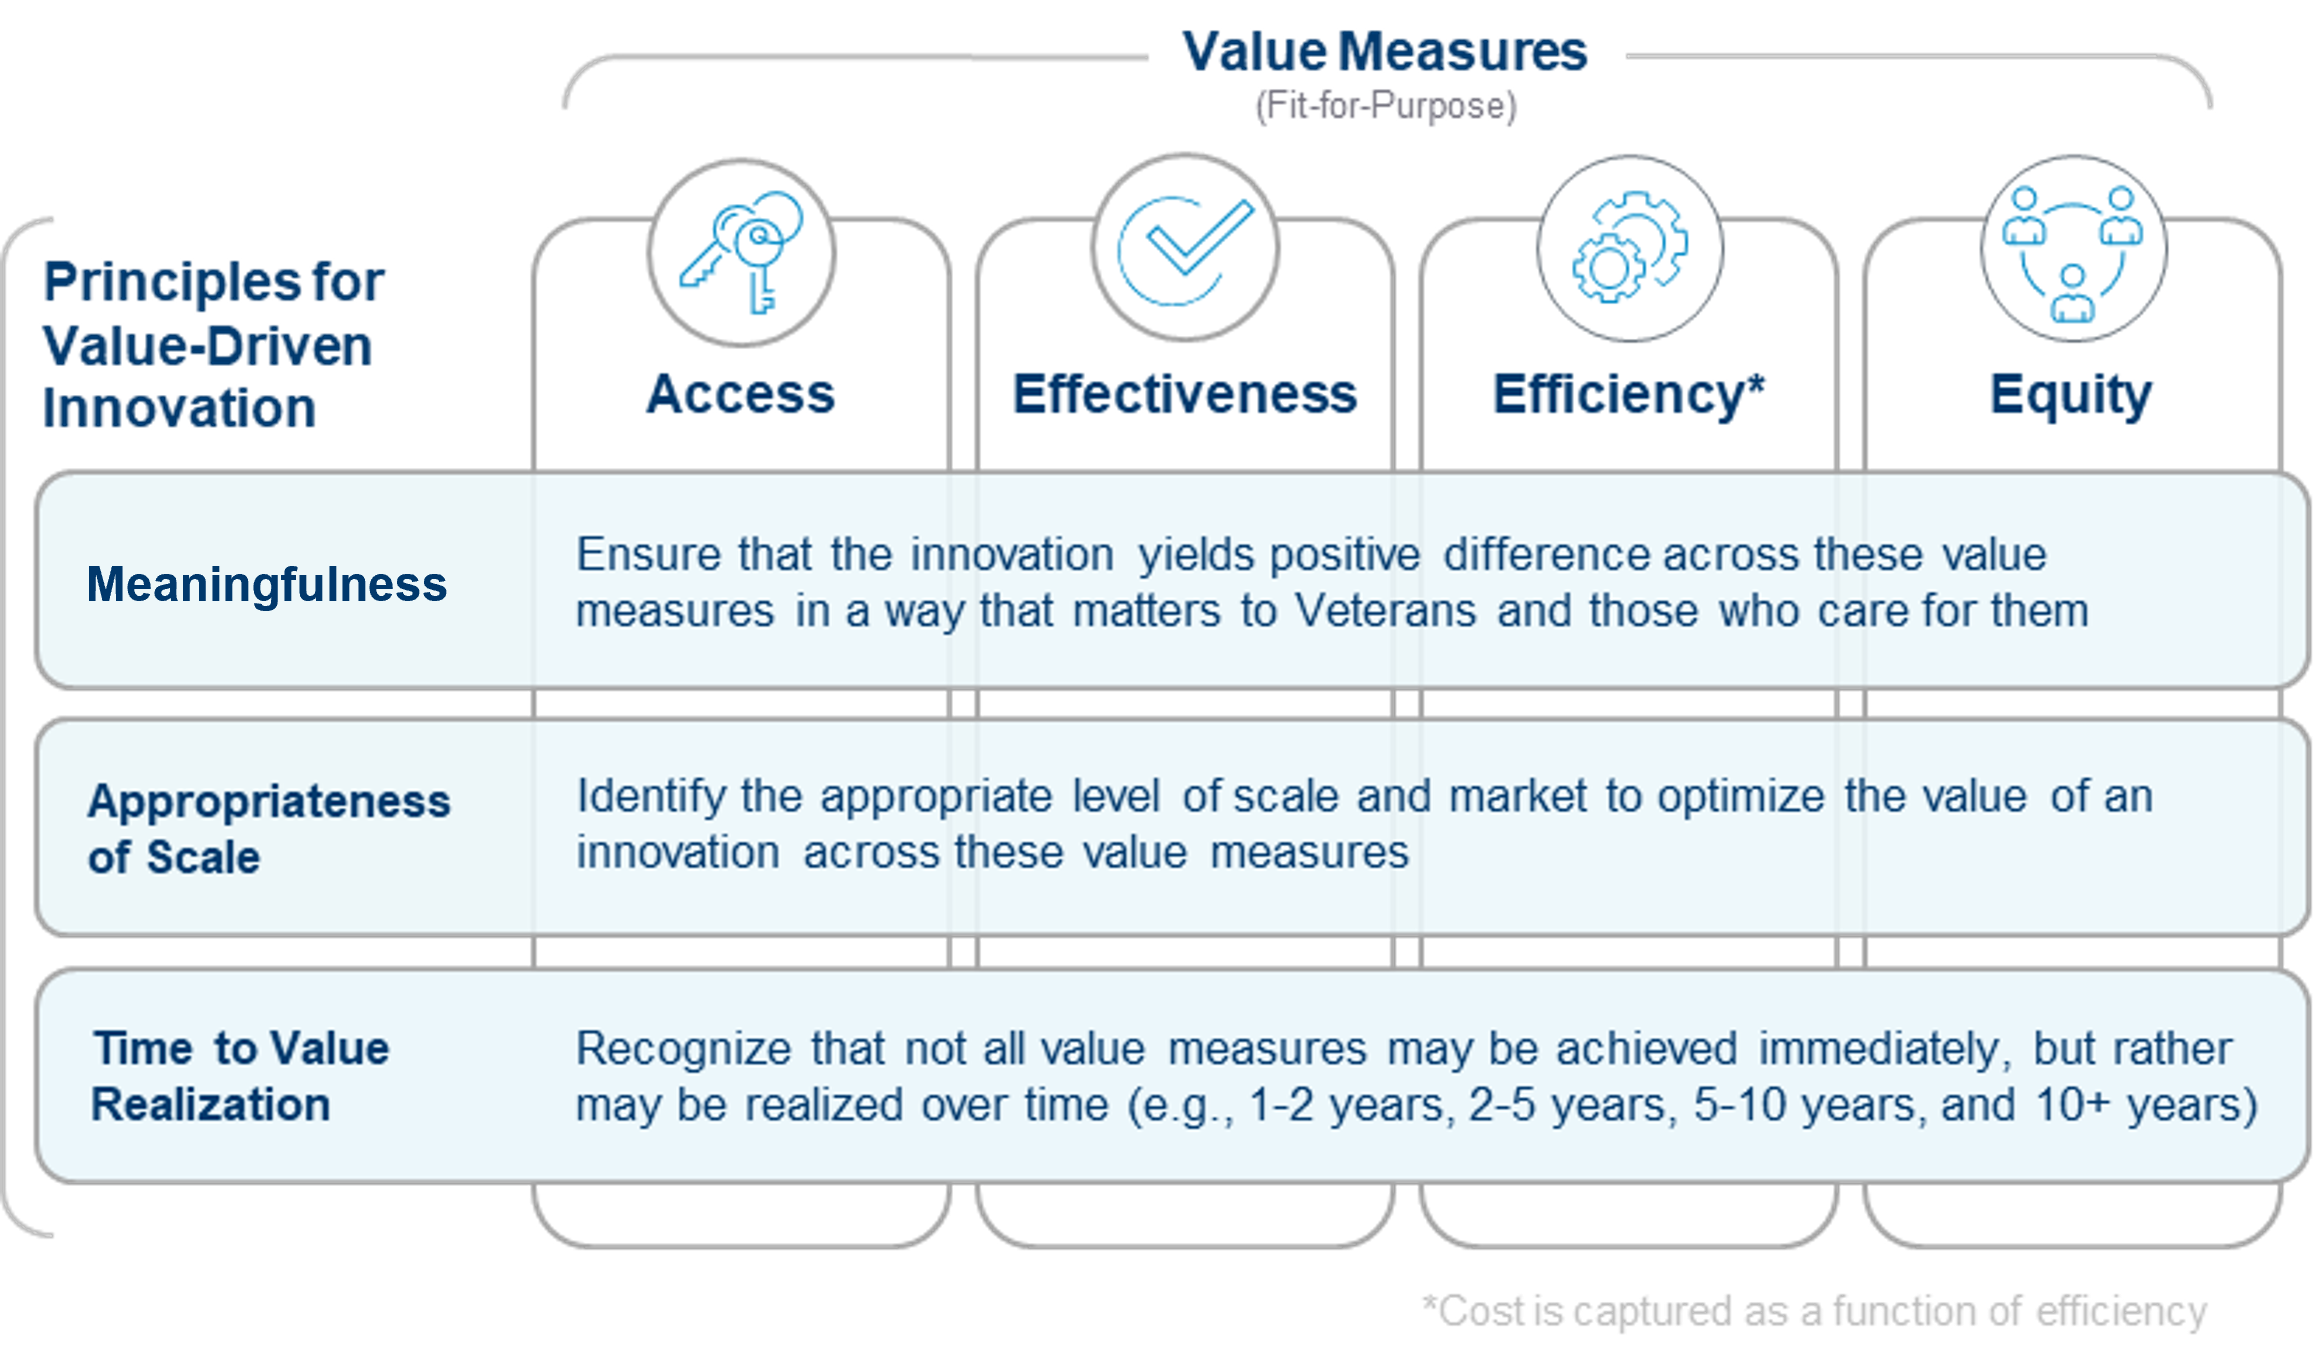 Principles for Value-driven Innovation